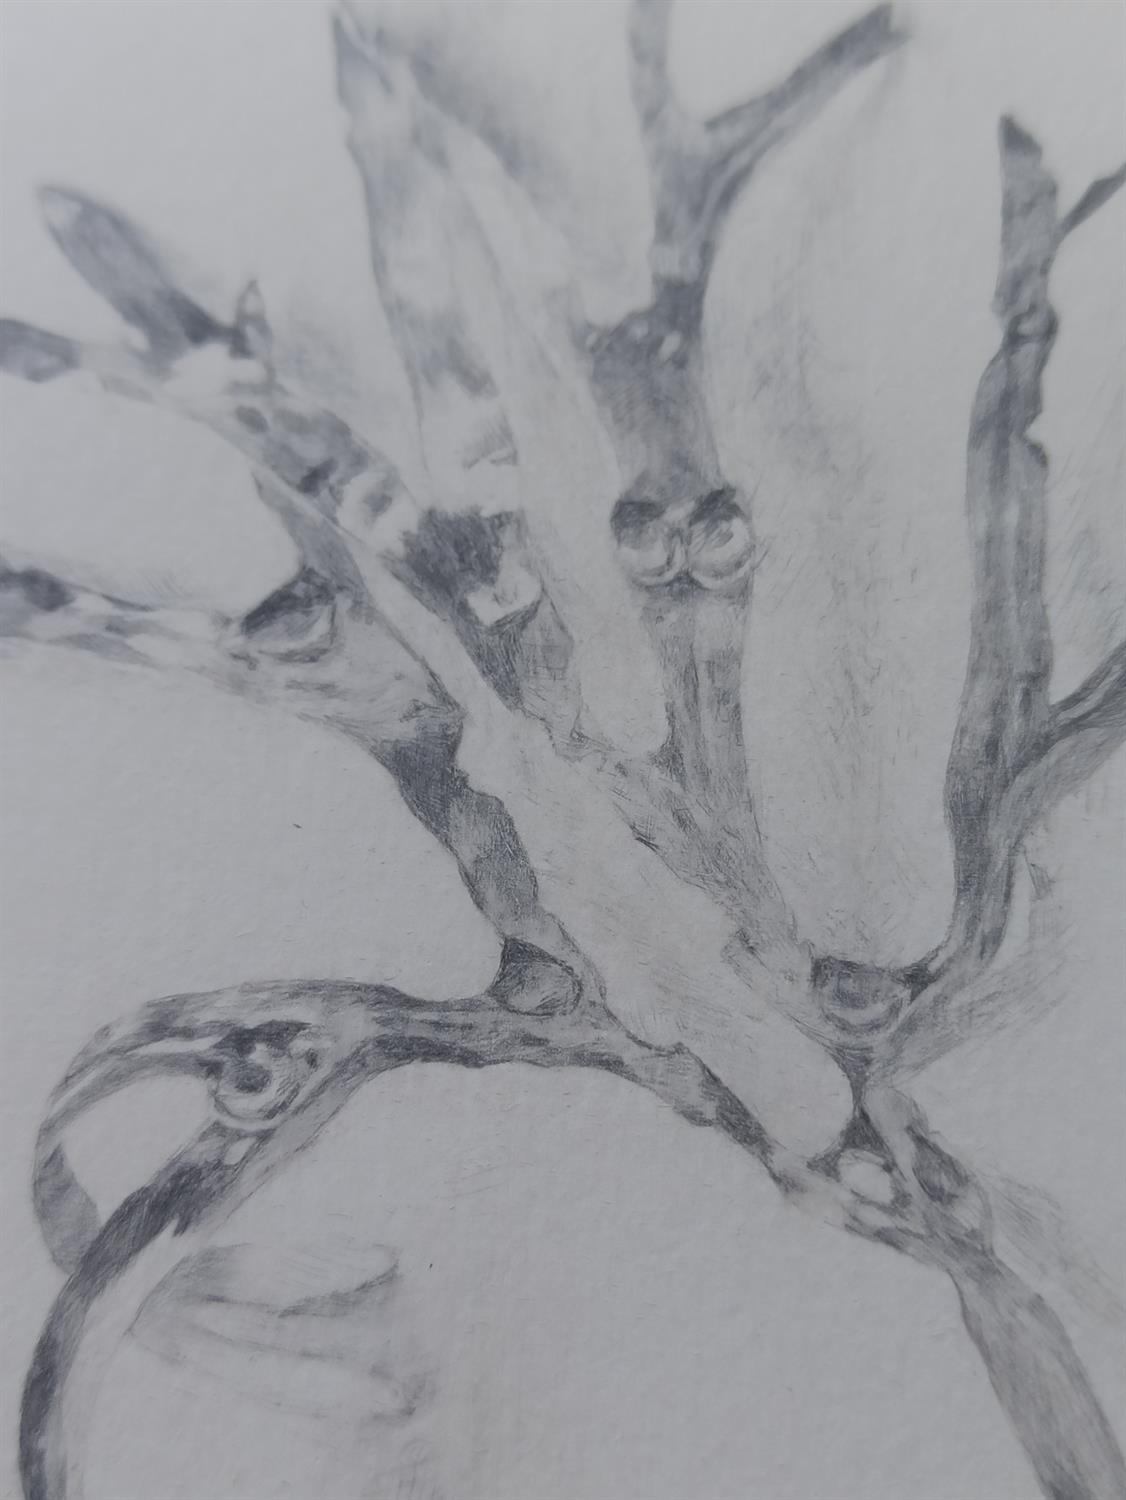 Hannah Downing, Seaweed, Silverpoint, January 2021 - Image 3 of 3